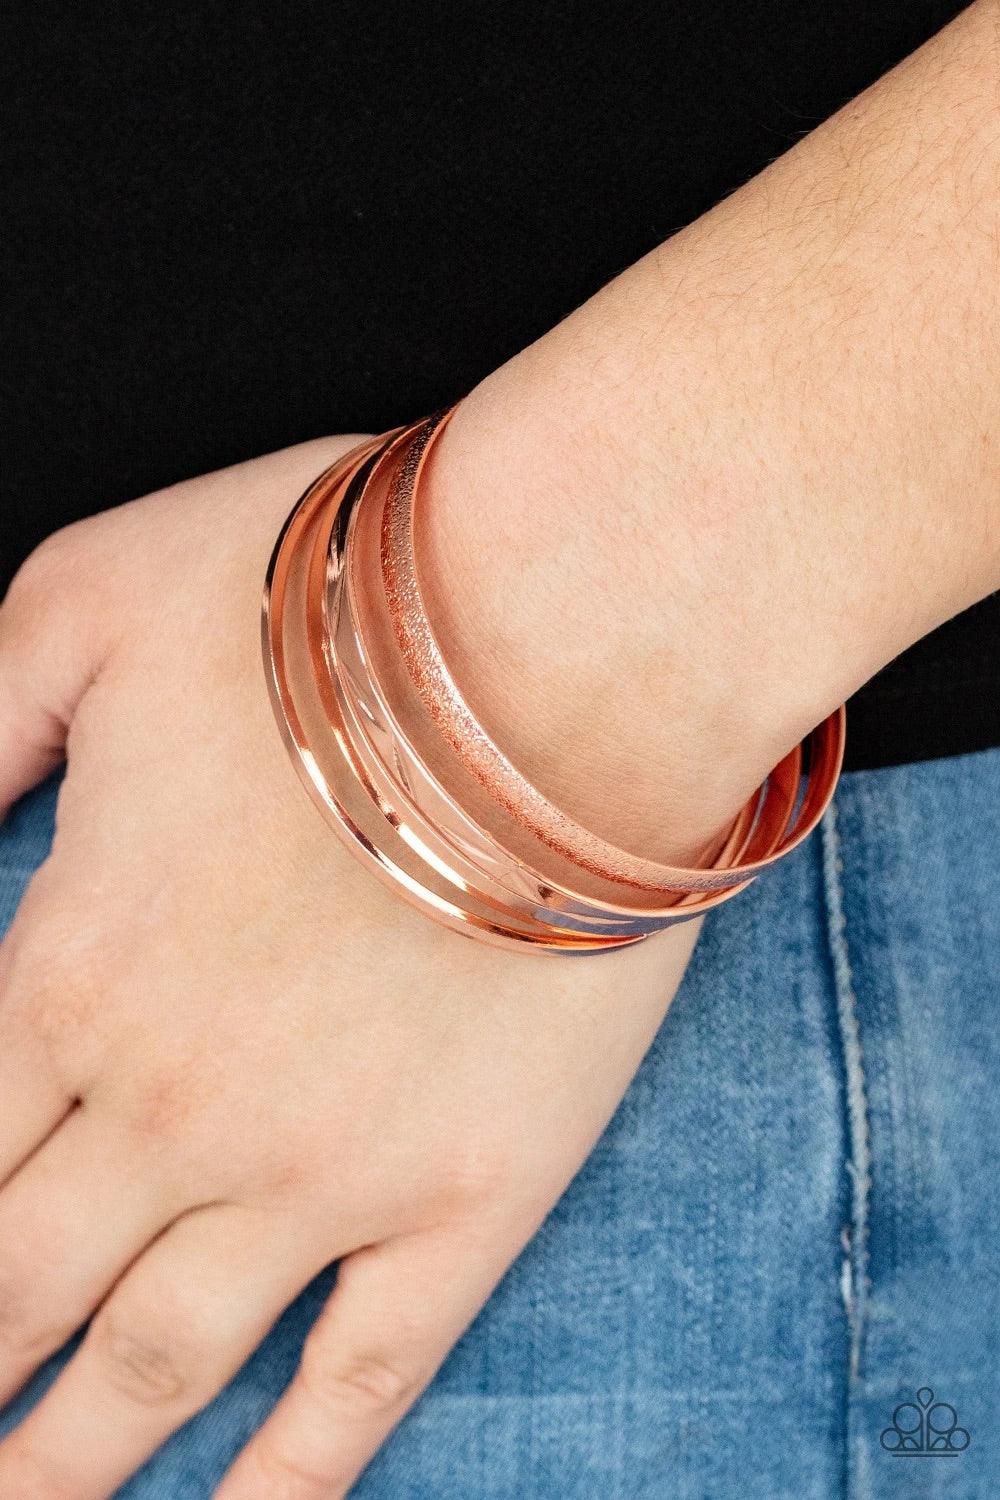 Paparazzi Accessories Stackable Style - Copper Varying in hammered, textured, and high sheen finishes, a mismatched collection of shiny copper bangles stacks across the wrist for a classic fashion. Jewelry